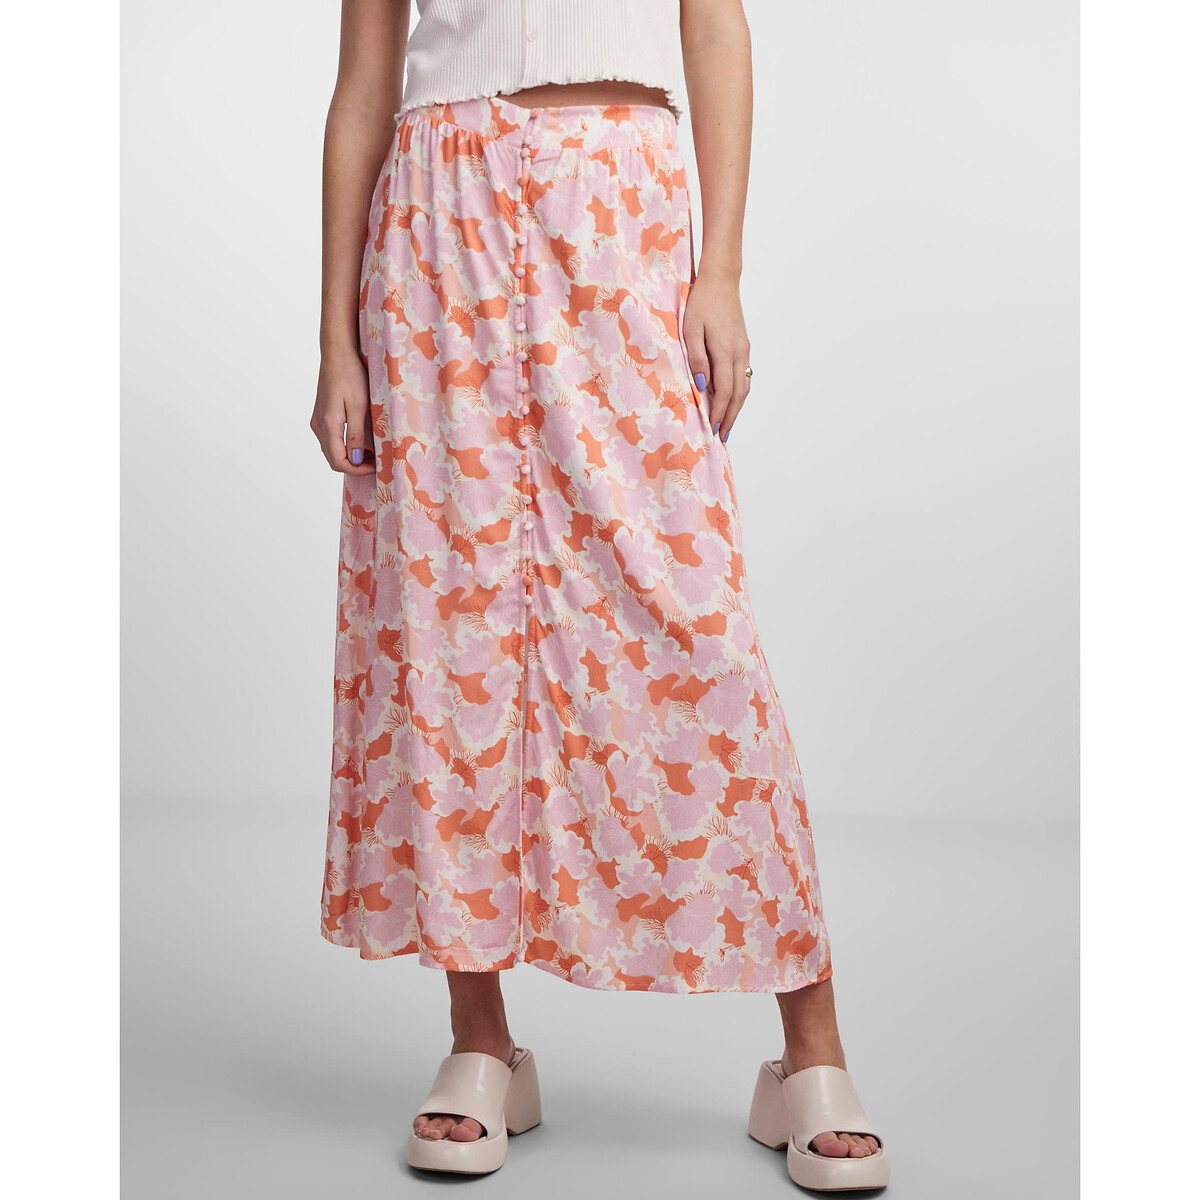 Image of Floral Print Midaxi Skirt with High Waist